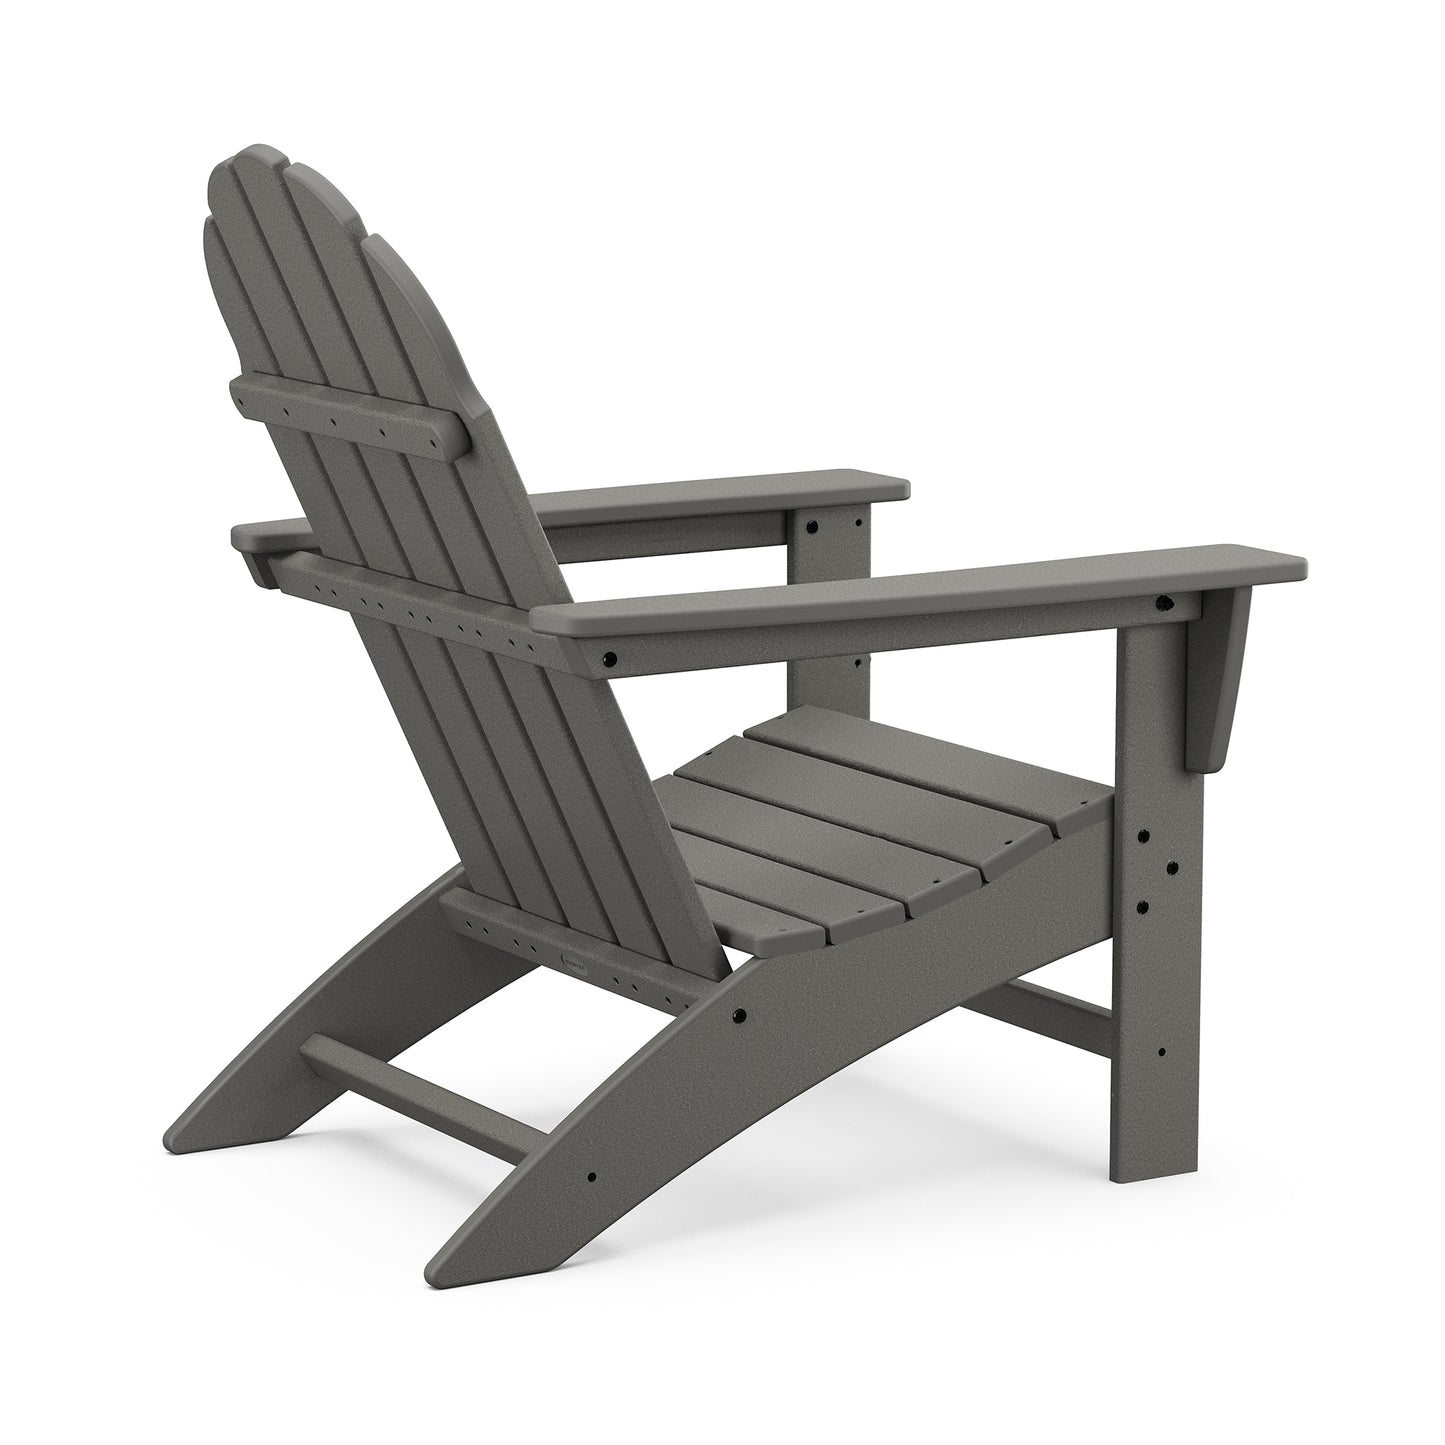 A POLYWOOD Vineyard Adirondack chair made of gray slats, featuring a high back and wide armrests, set against a plain white background.